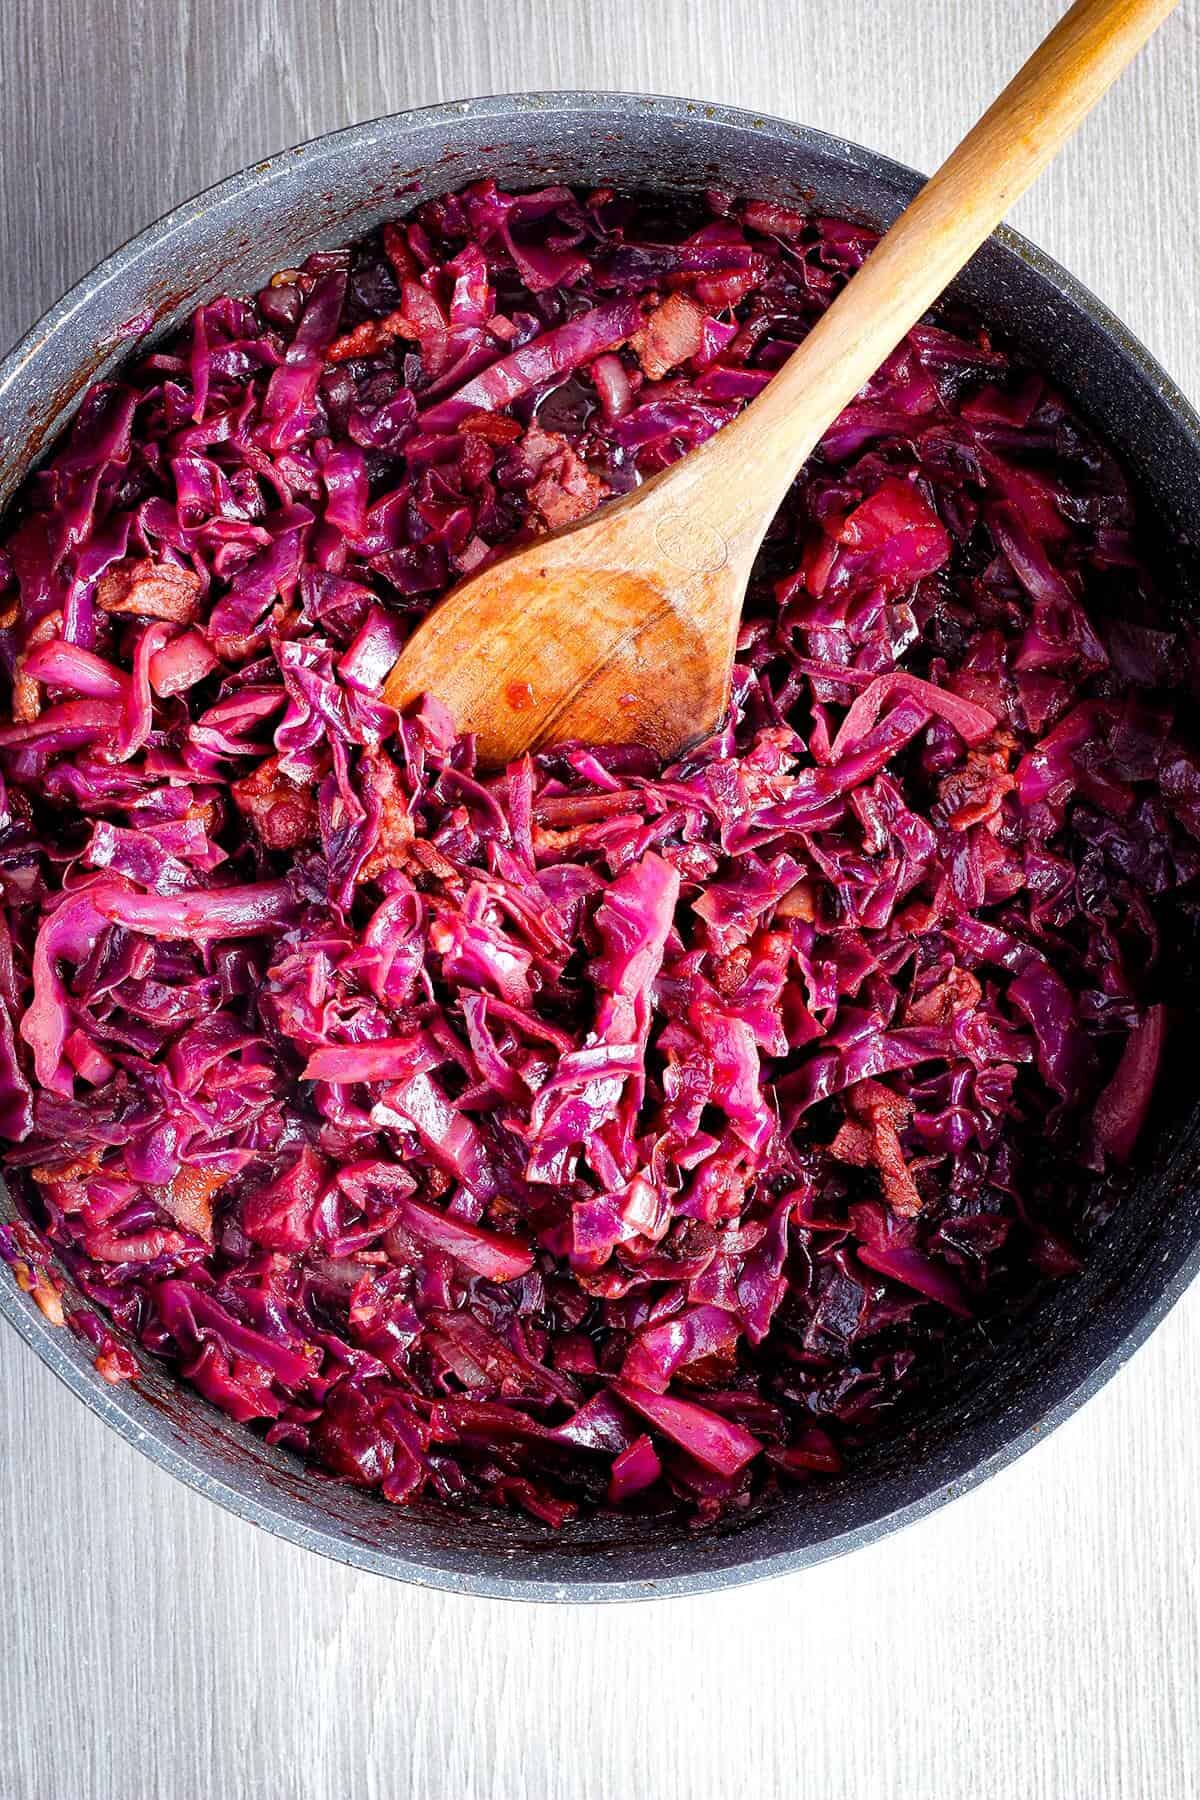 Braised cabbage with wooden spoon in pan.